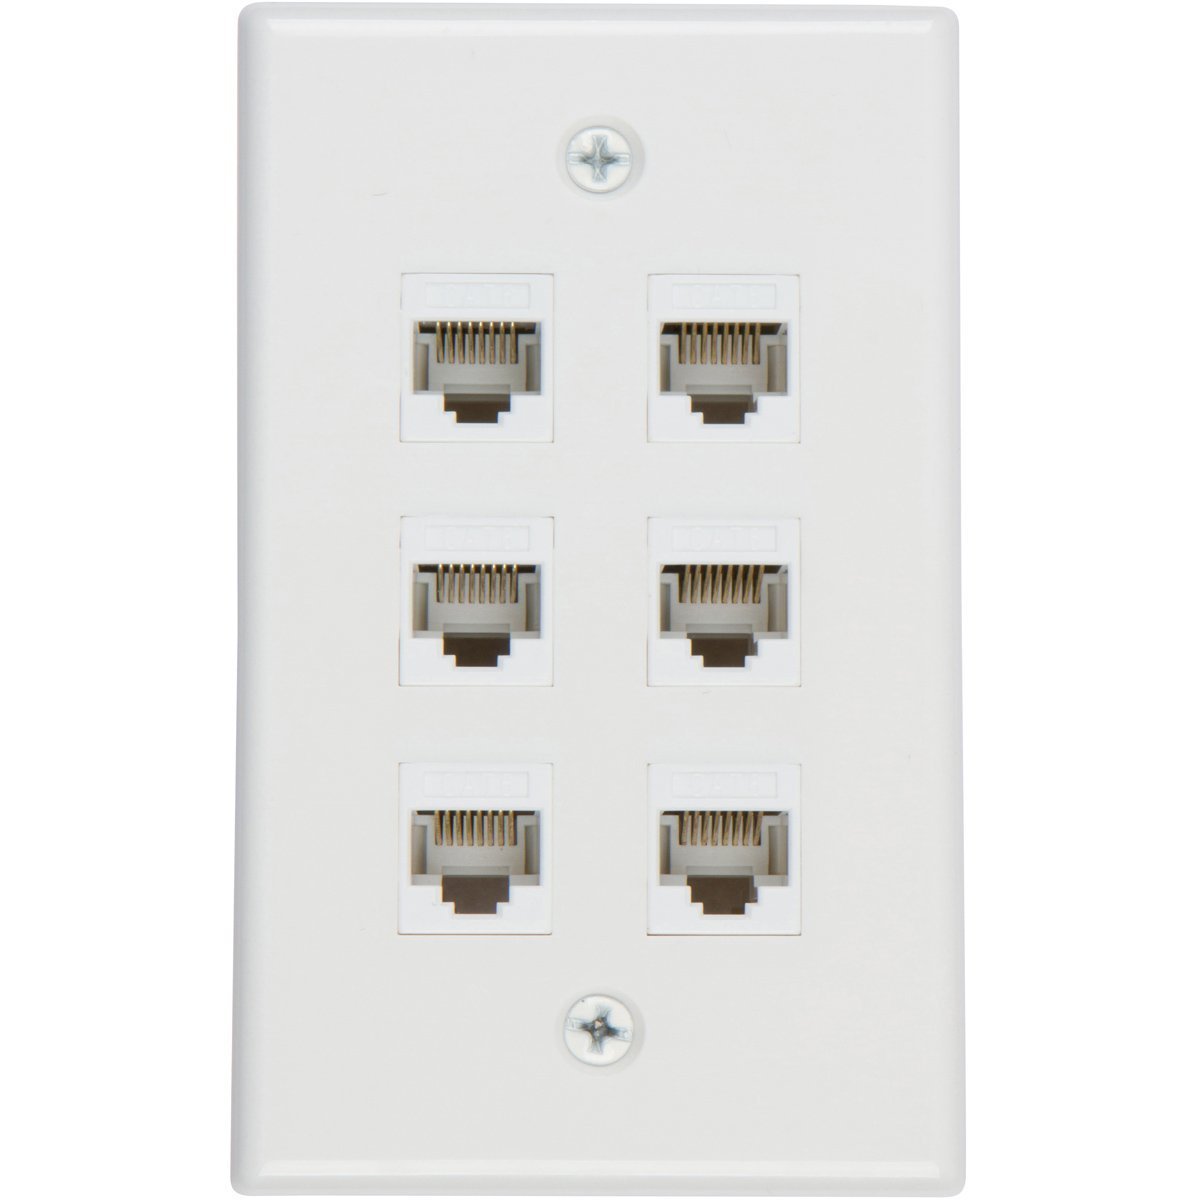 Ethernet Wall Plate Cat6 Ethernet Cable Wall Plate Adapter – 6 Port